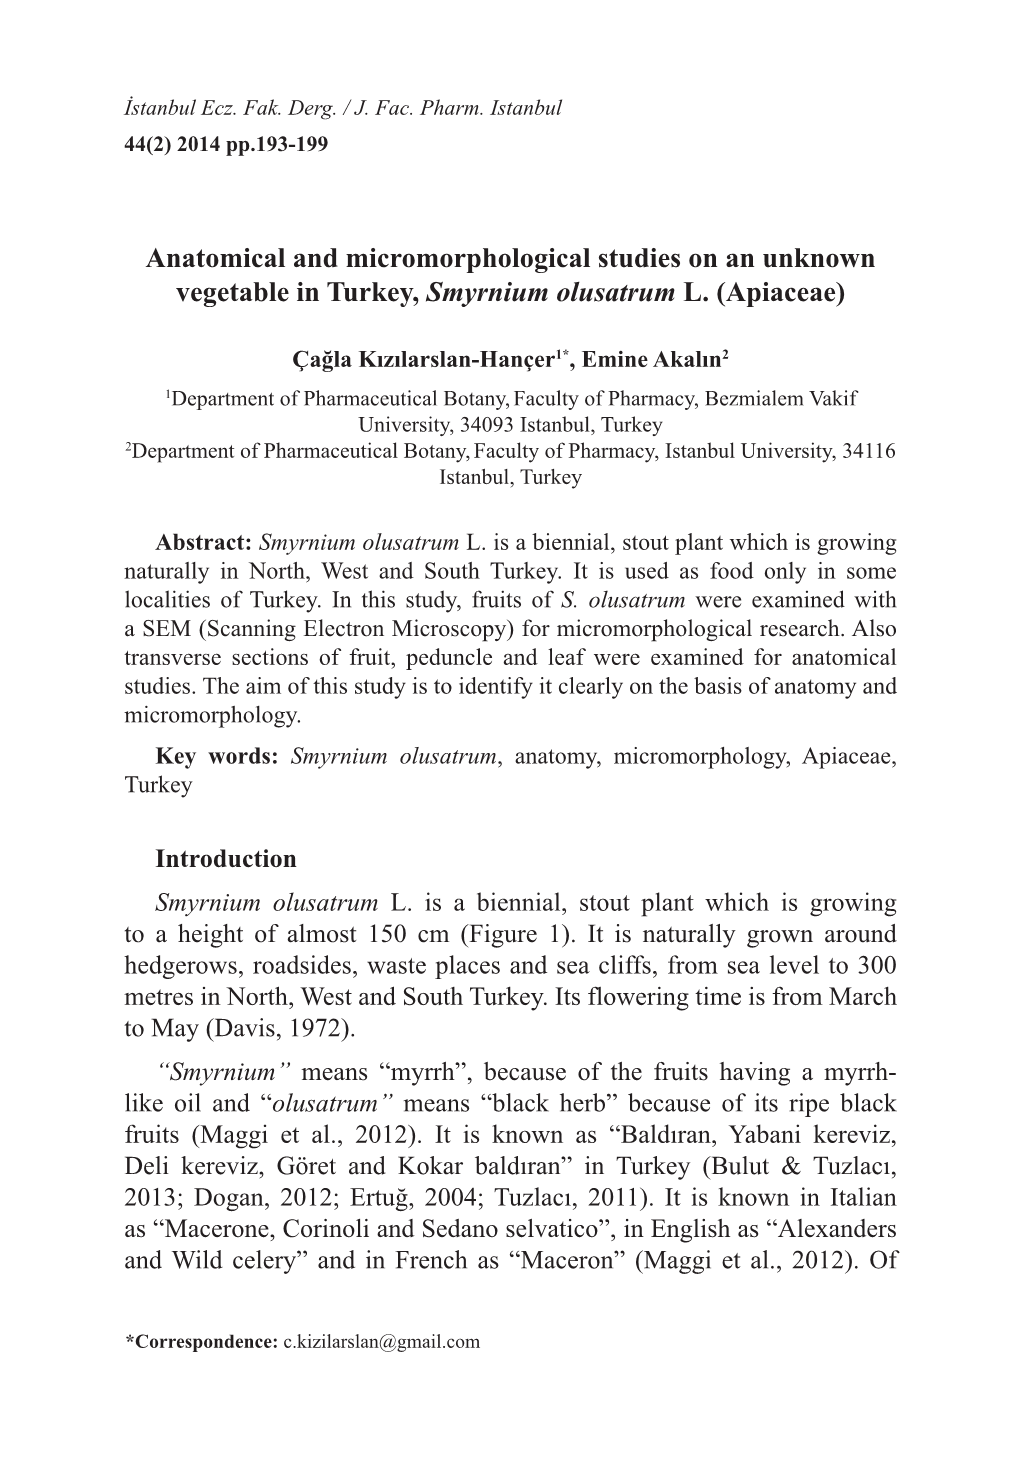 Anatomical and Micromorphological Studies on an Unknown Vegetable in Turkey, Smyrnium Olusatrum L